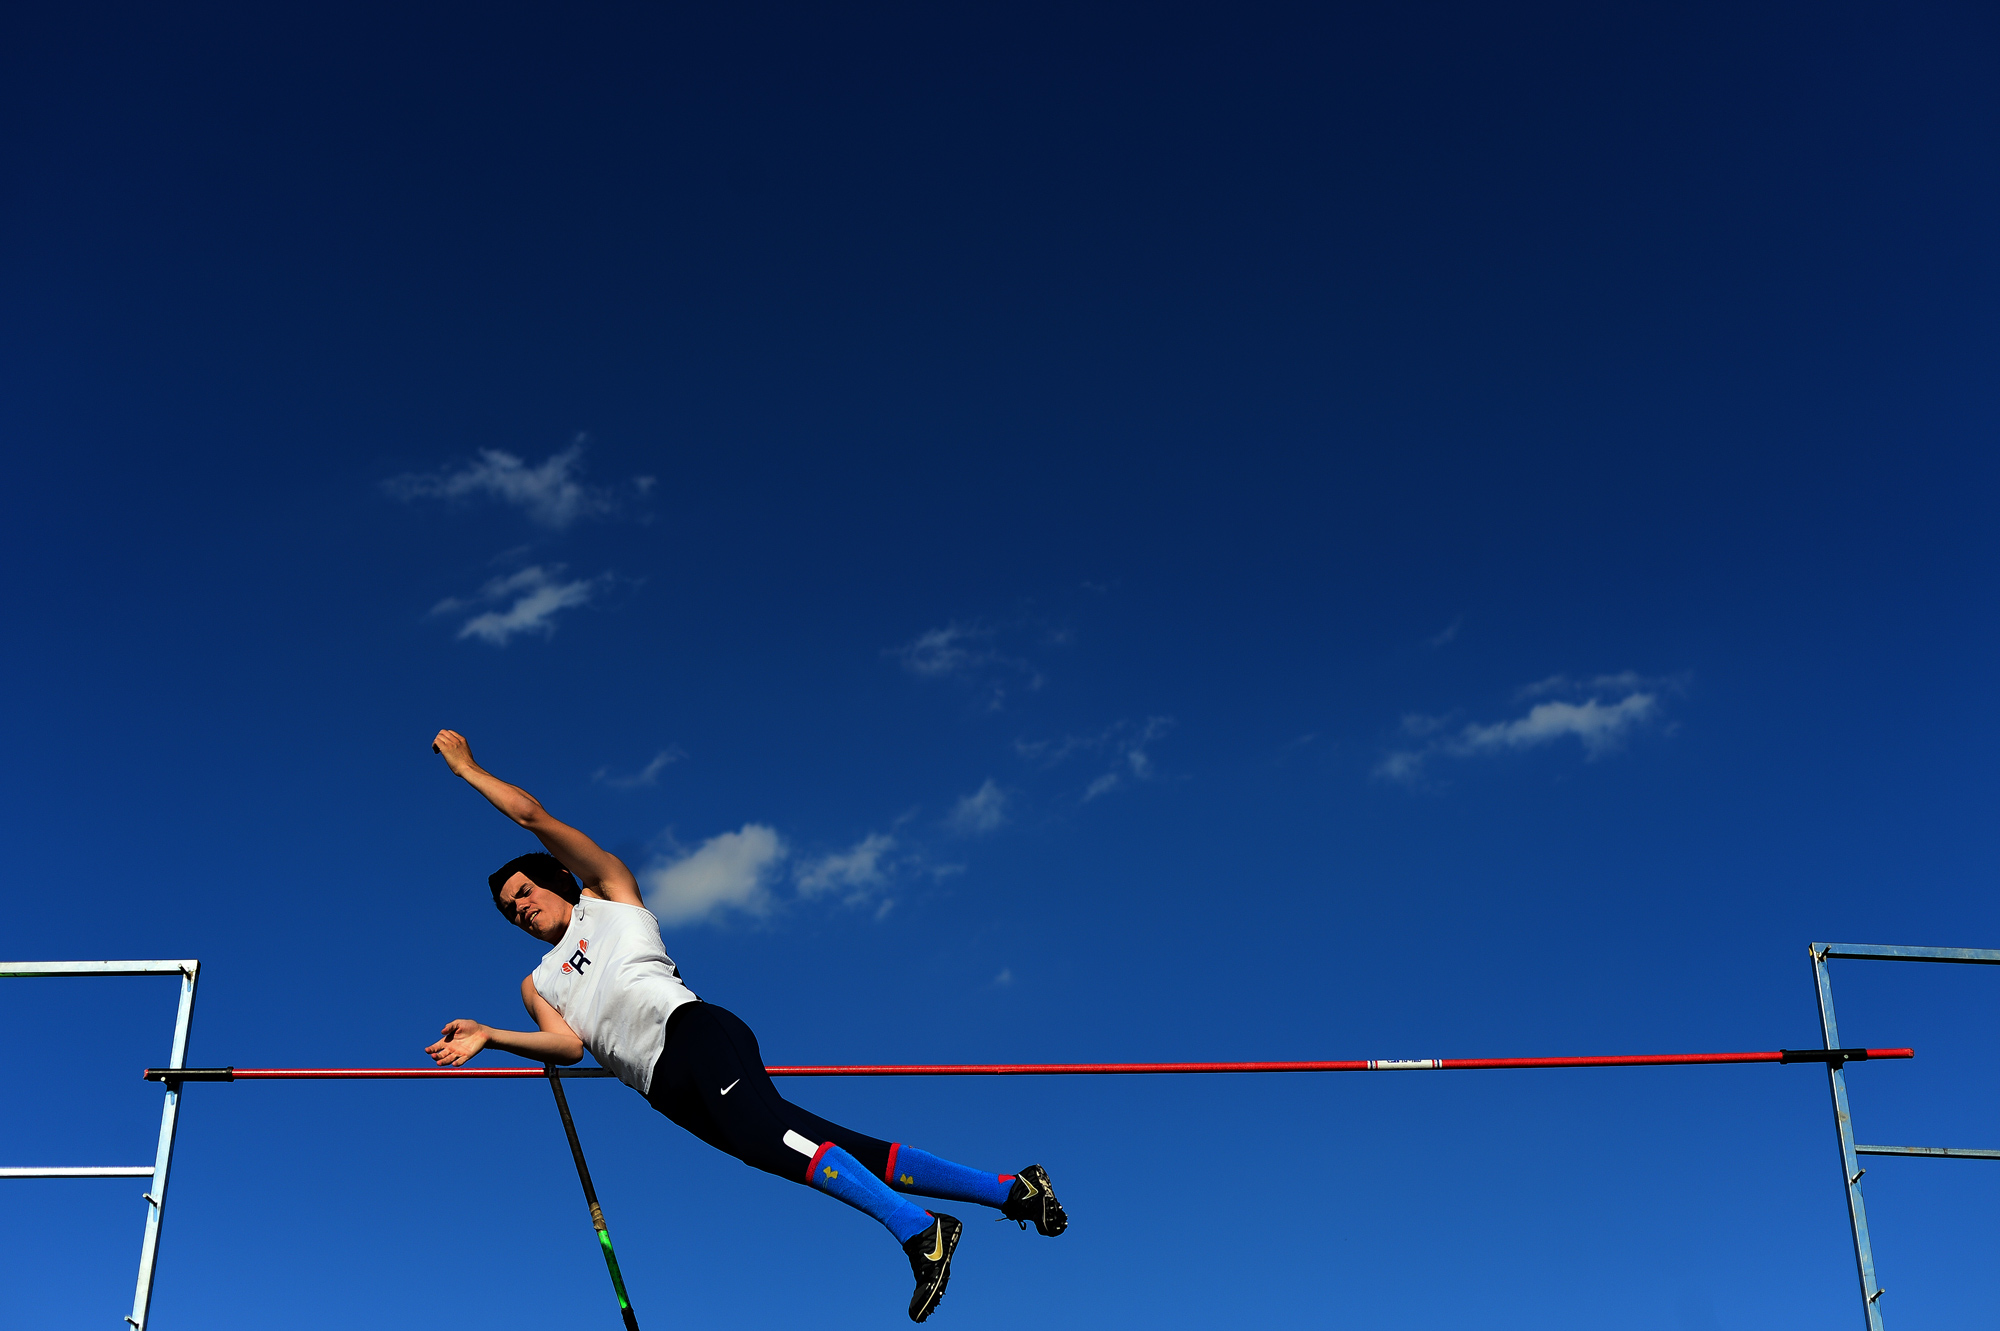  Reservoir's Dan Larkin competes in the pole vault event during the Howard County Outdoor Track and Field Championships in Columbia Maryland on May 6, 2014. Larkin went on to finish eight overall in the event.&nbsp; 